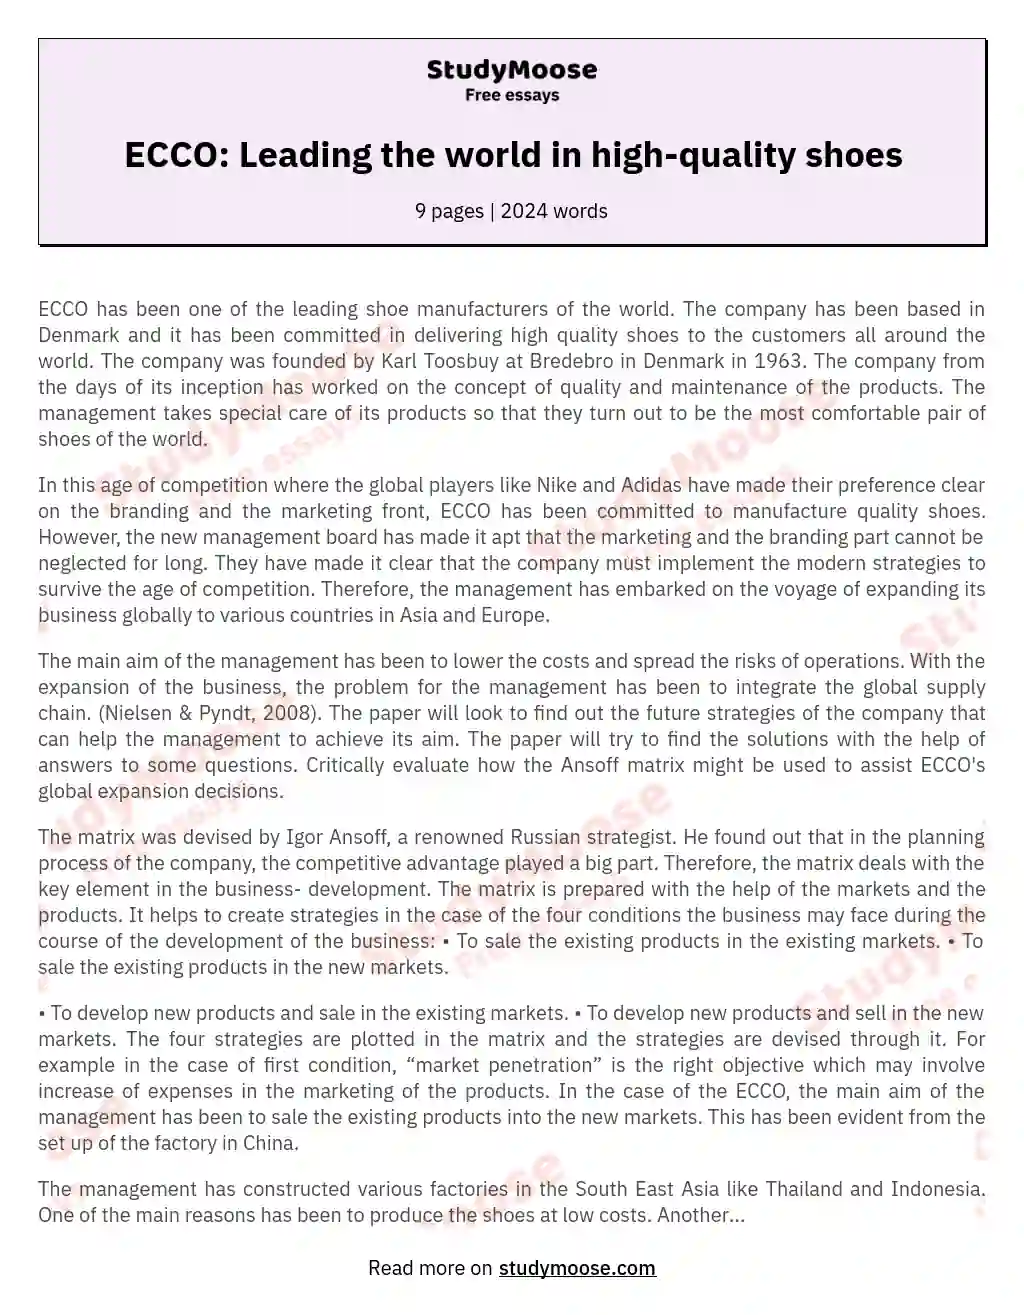 ECCO: Leading the world in high-quality shoes essay